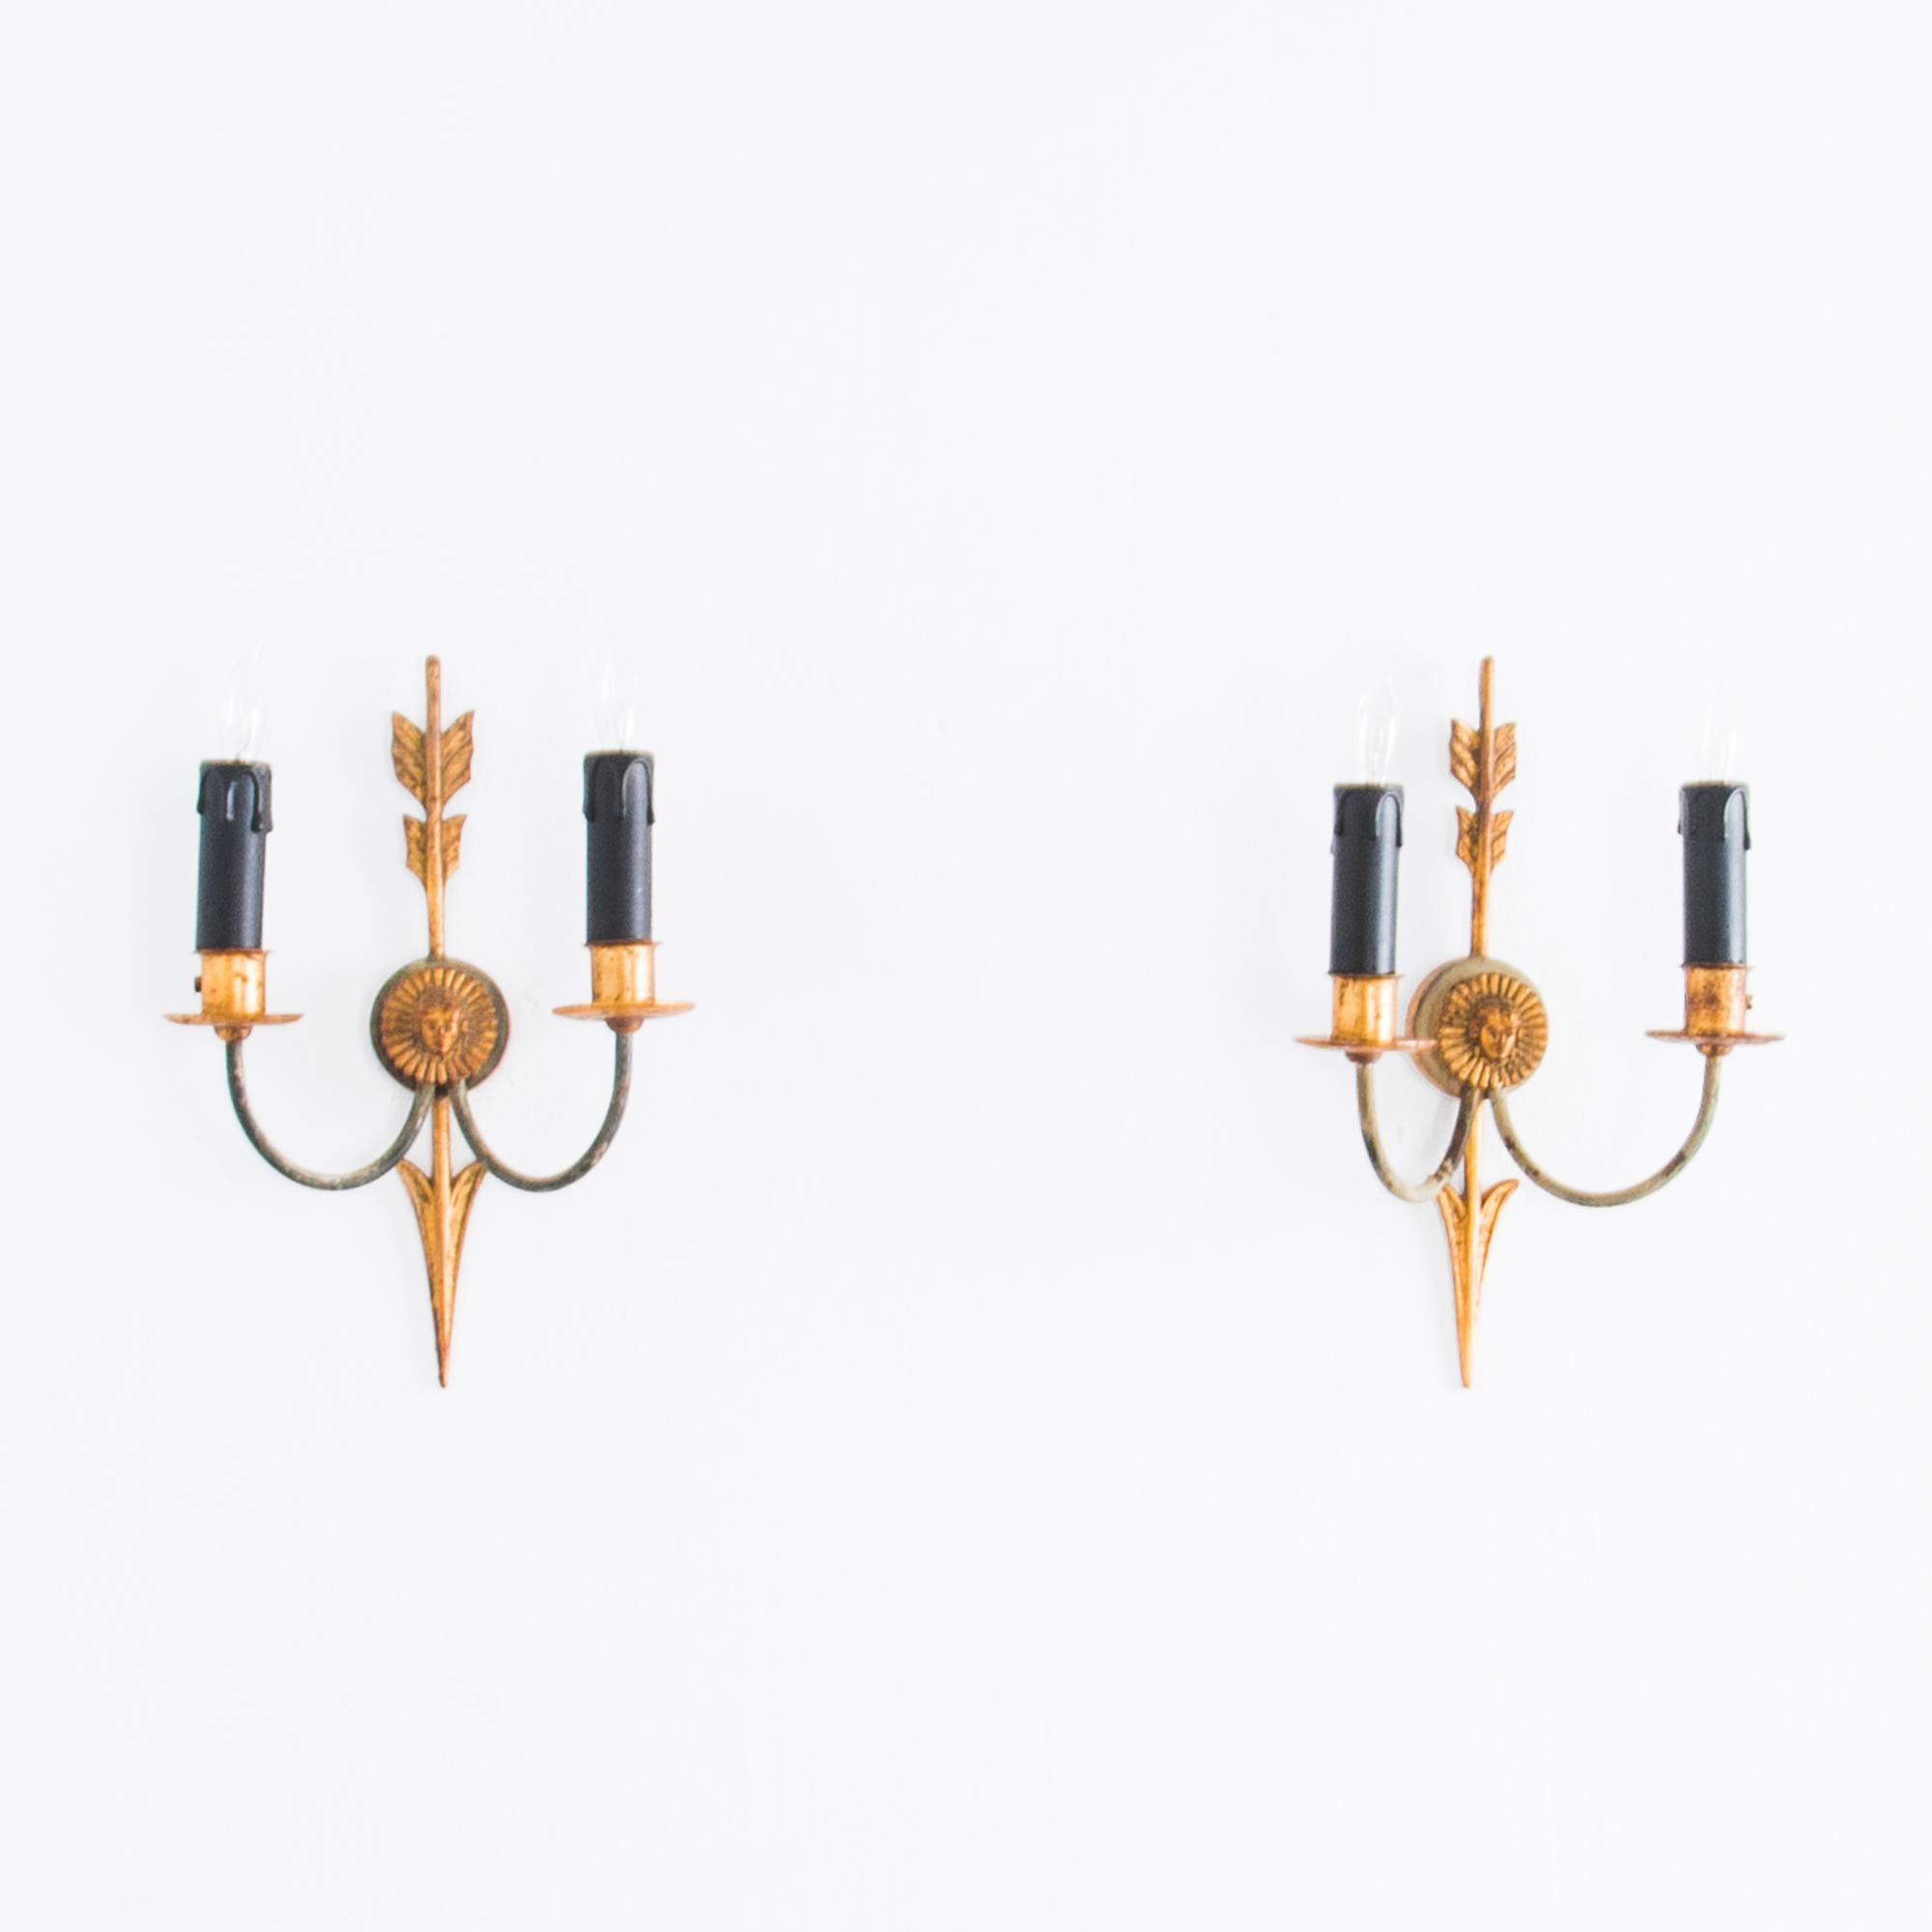 This pair of Second Empire style wall sconces from turn of the century France provide a handsome antique light source. The backplates take the form of a golden arrow piercing a radiant emblem, from which emerge a pair of curved symmetrical arms.